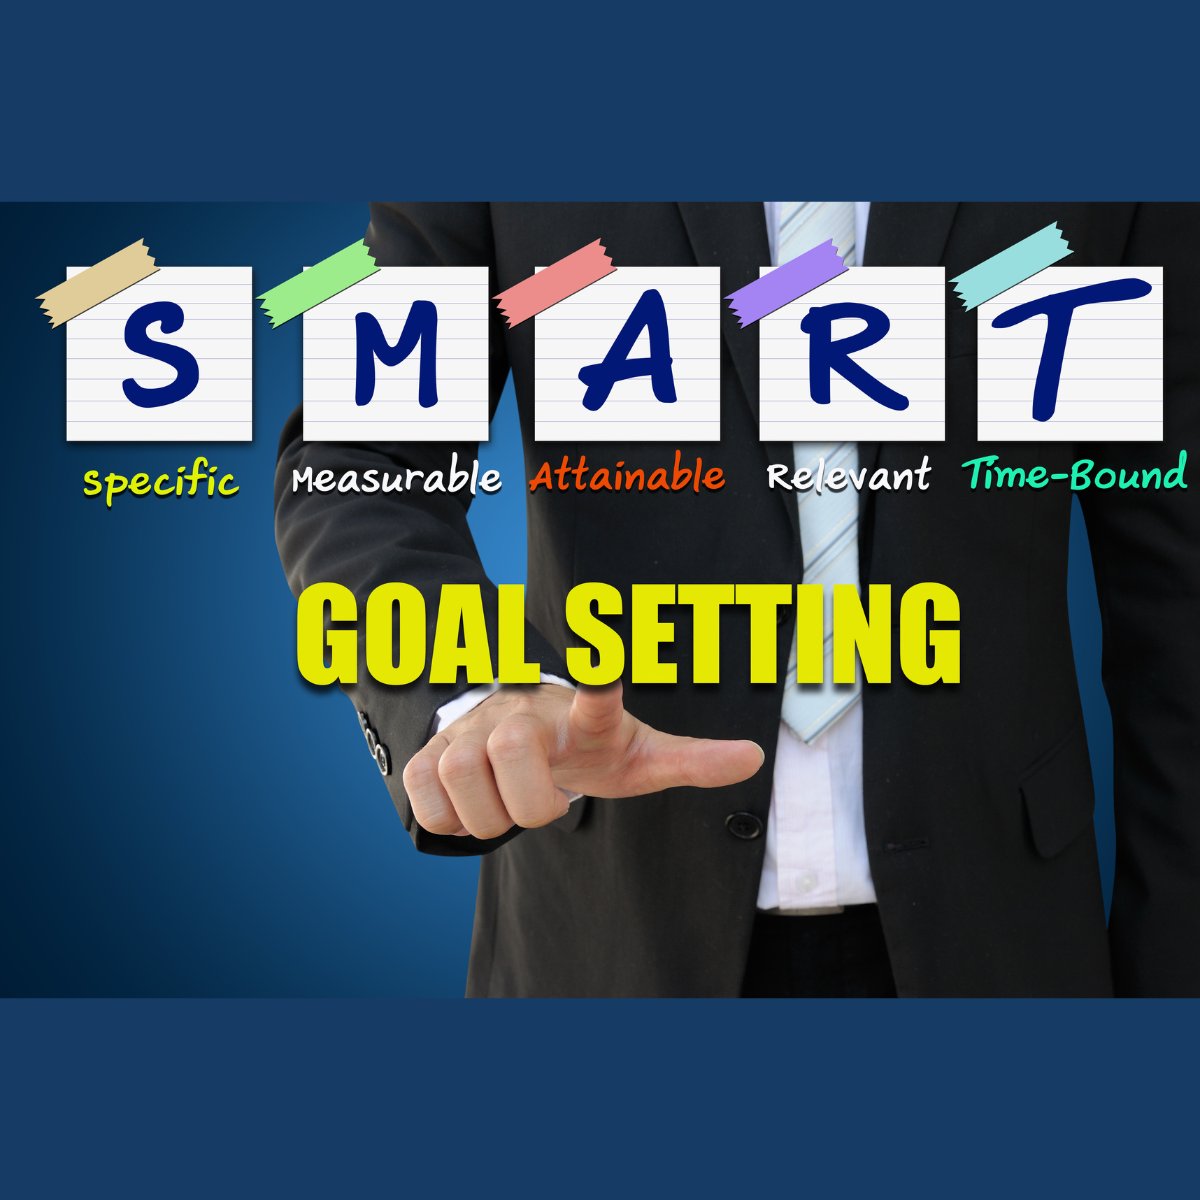 🚀Elevate your financial journey with SMART goals! Specific: Define clear objectives. 
Measurable: Track progress with milestones. 
Attainable: Set realistic goals. 
Relevant: Align with priorities. 
Time-bound: Set deadlines. 
What's your key financial goal? Reply! #SMARTGoals